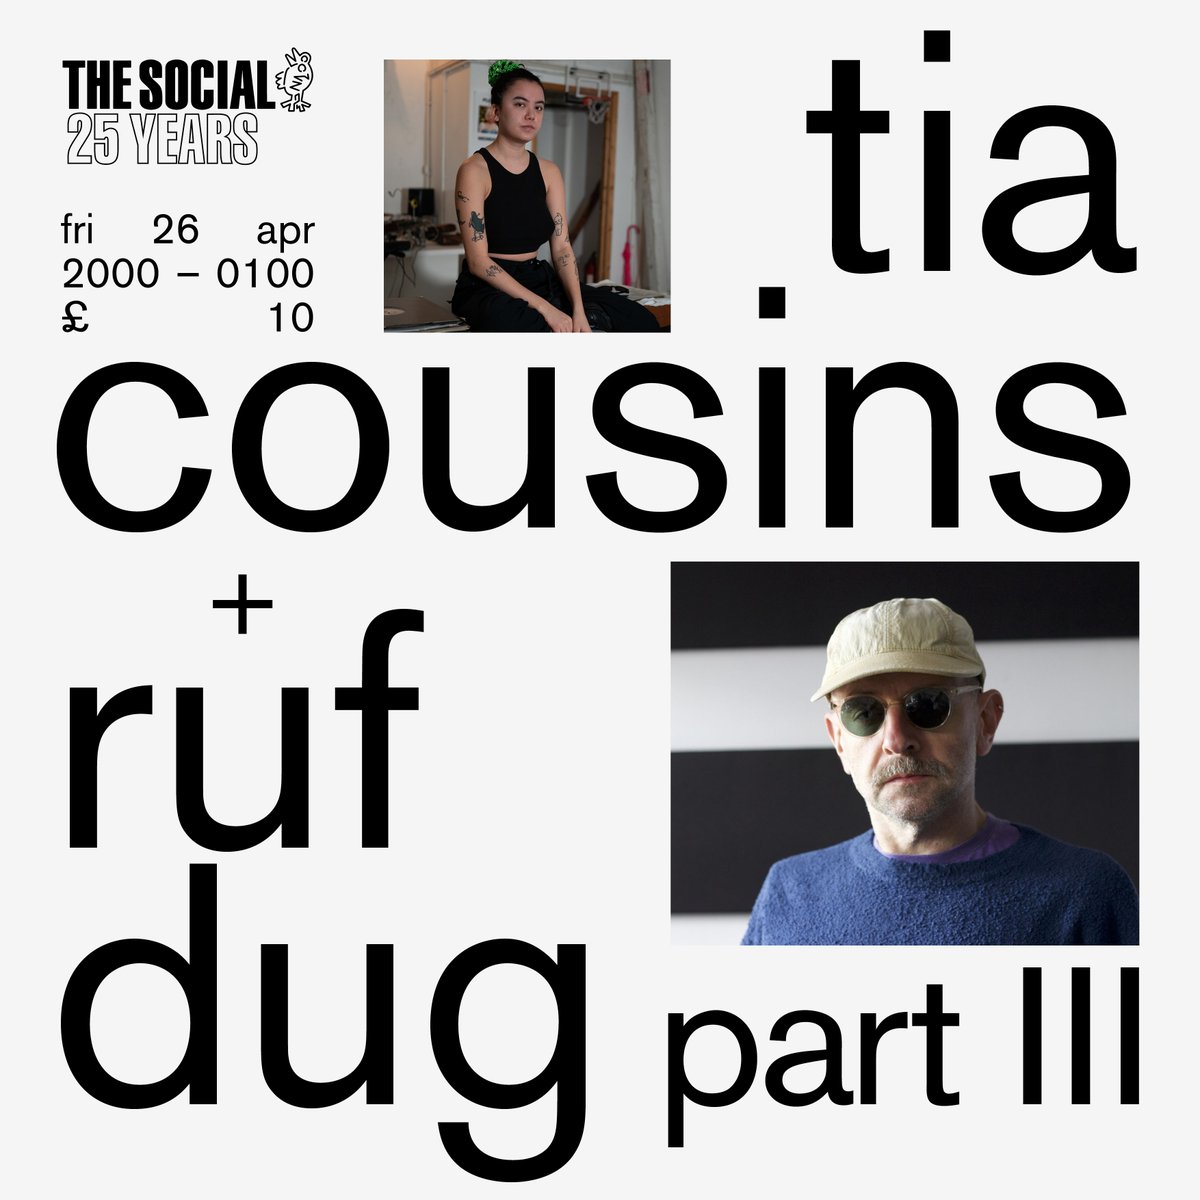 Morning all, going to do a Social club round up here . . starting with a special announcement. Tia Cousins & @RufDug are back at the basement controls (26 April) all night for Part III of their legendary B2B sessions. + babyschön and Zoe Pea upstairs too! ra.co/events/1884024